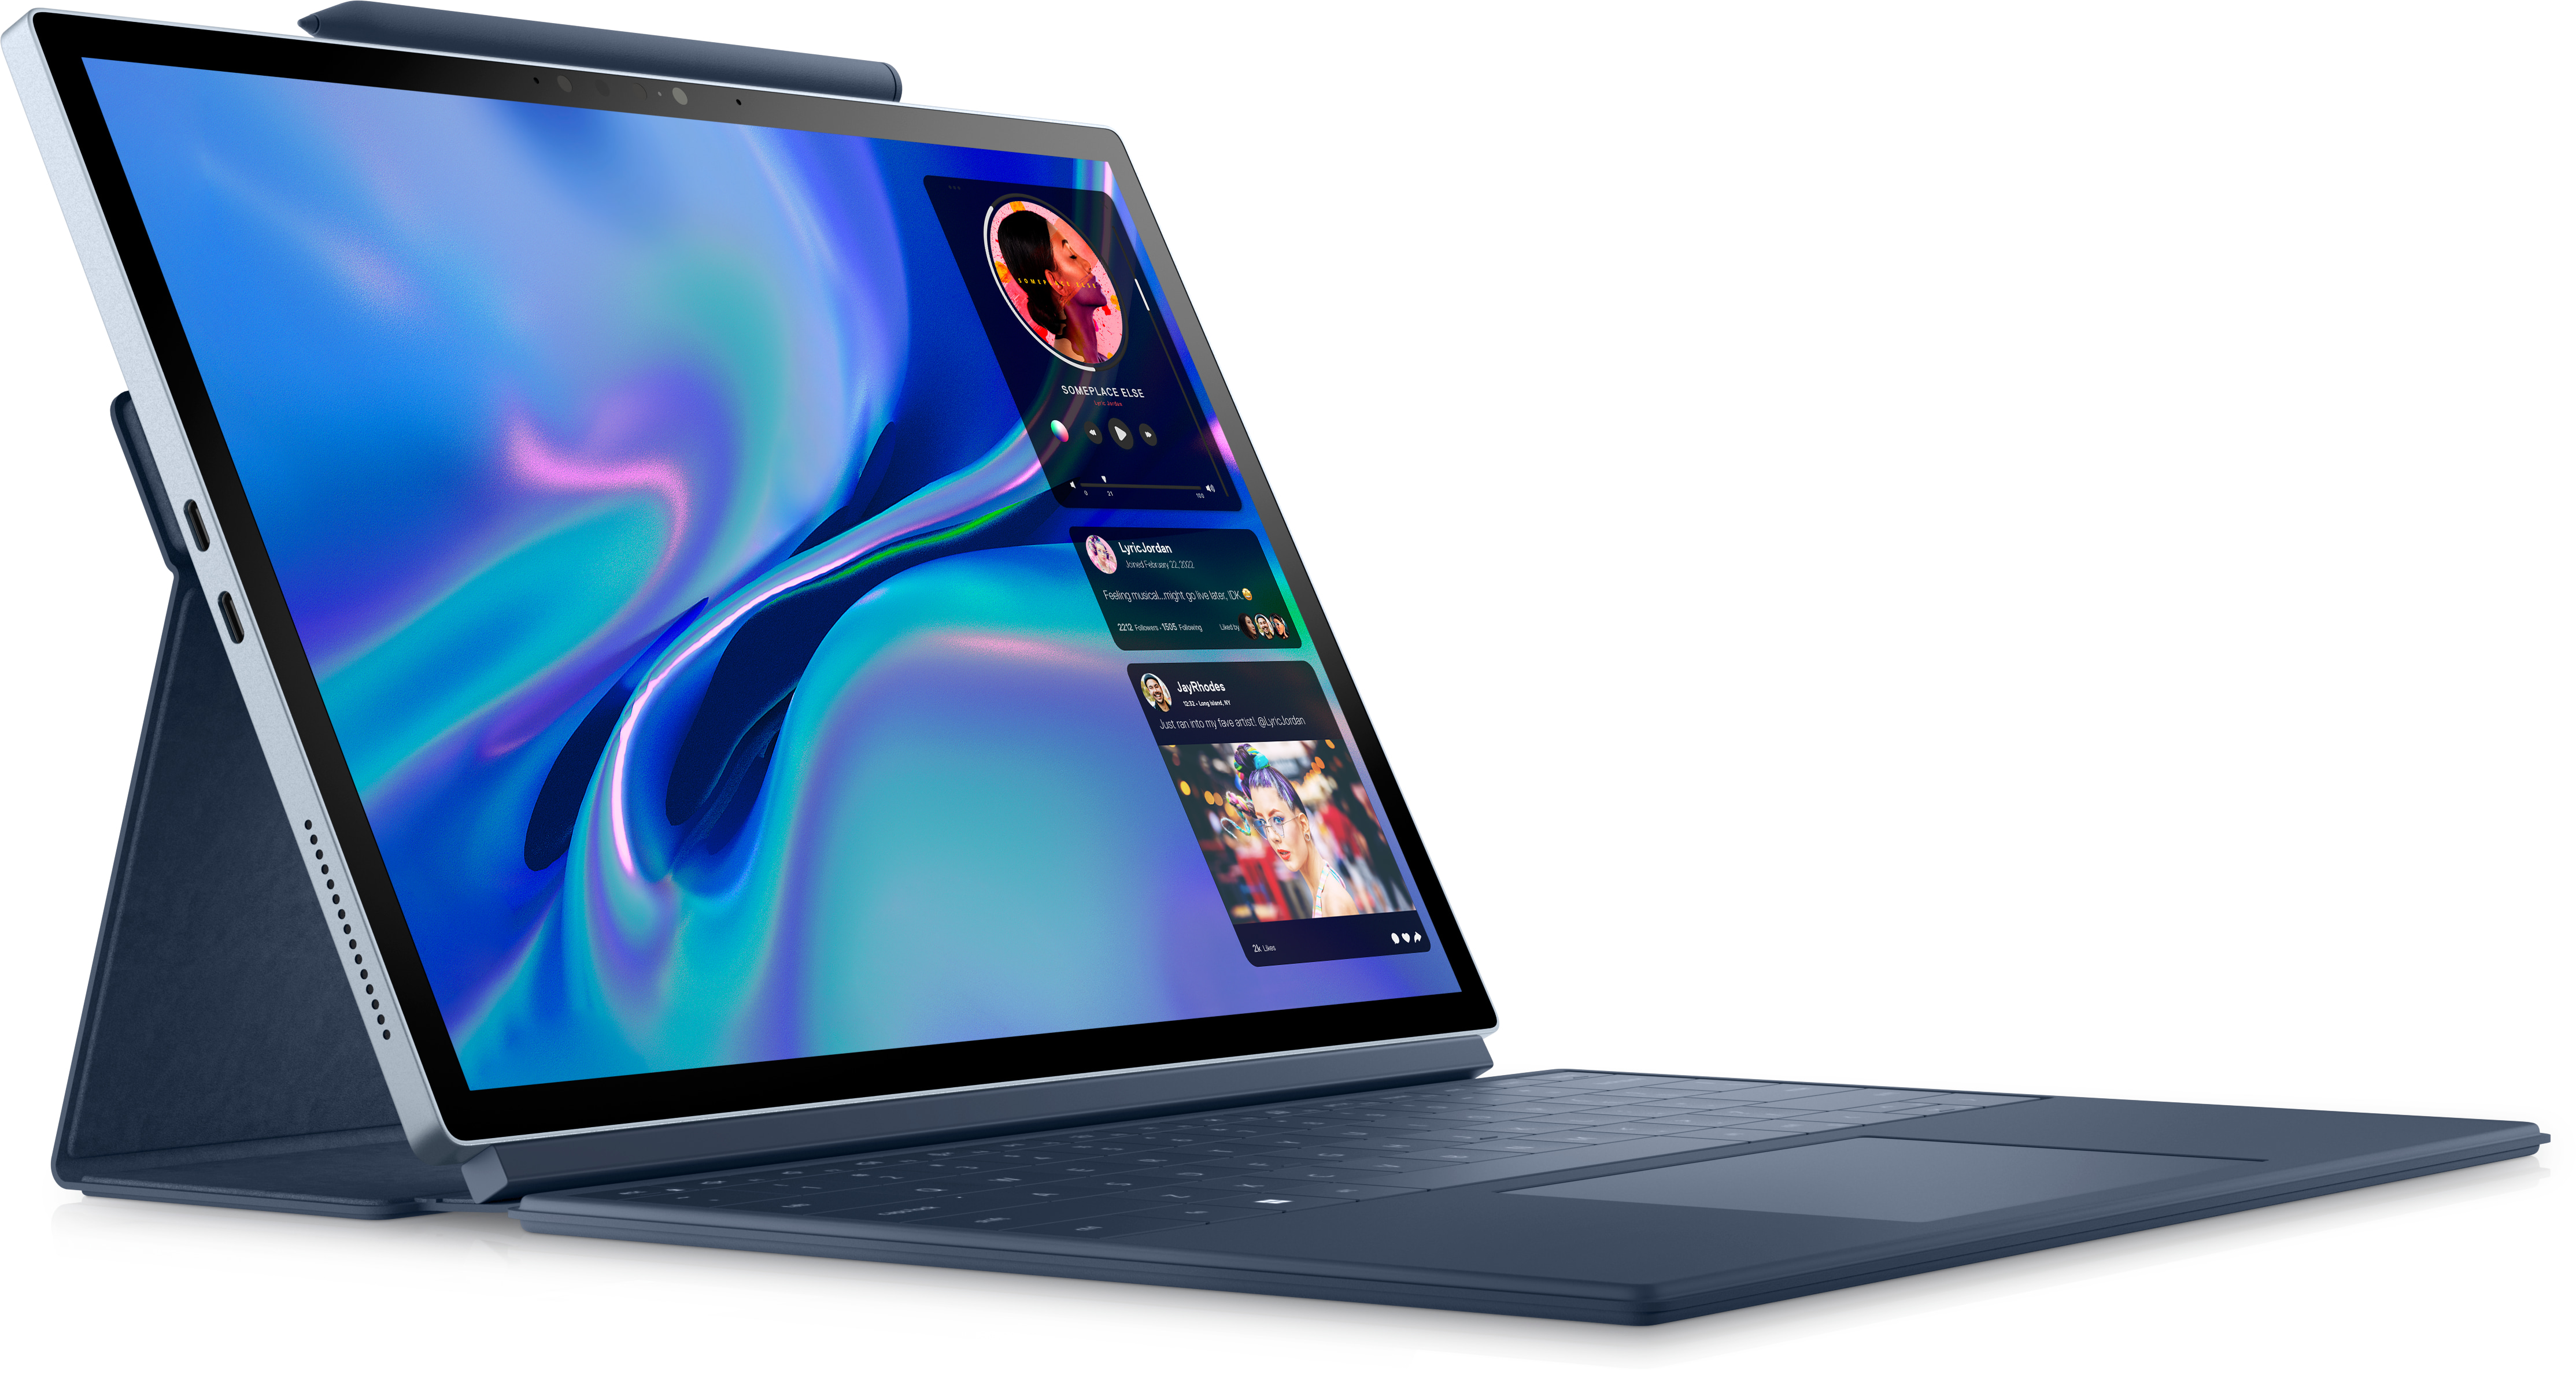 https://i.dell.com/is/image/DellContent/content/dam/ss2/product-images/dell-client-products/notebooks/xps-notebooks/xps-13-9315-2in1/media-gallery/blue/tablet-xps-13-9315-blue-gallery-10.psd?fmt=pjpg&pscan=auto&scl=1&wid=4455&hei=2384&qlt=100,1&resMode=sharp2&size=4455,2384&chrss=full&imwidth=5000